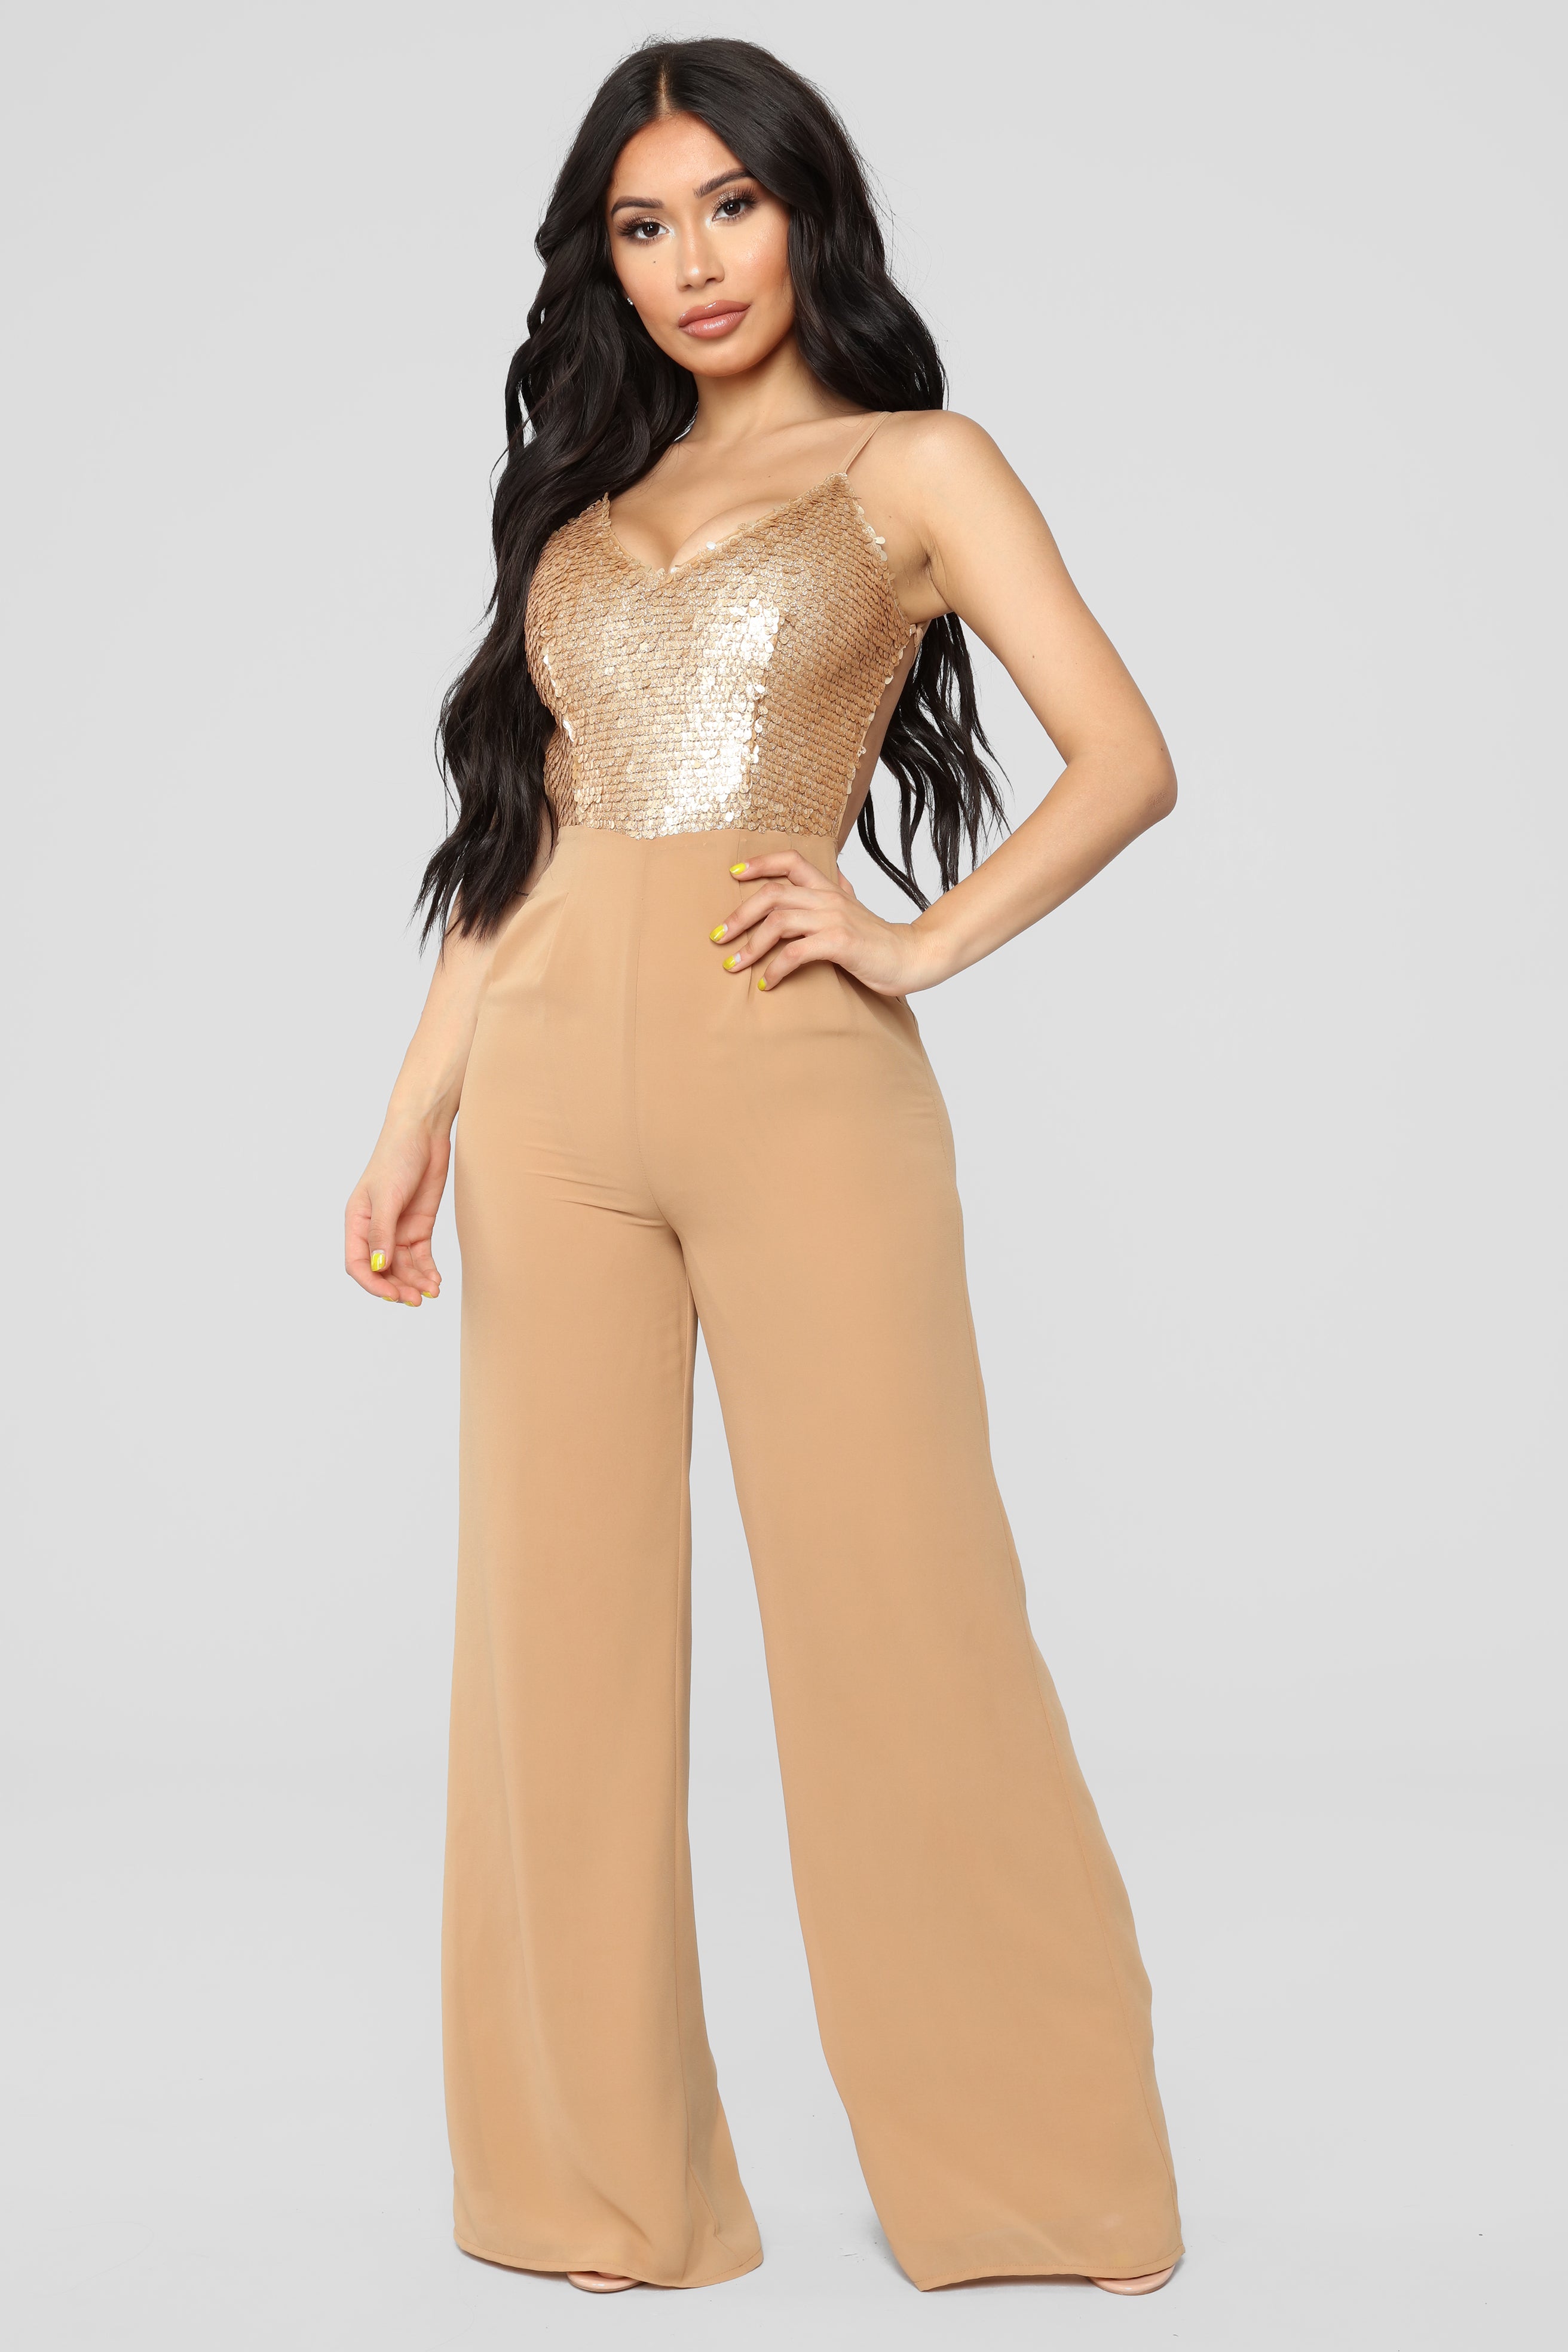 Womens Back In The Groove Jumpsuit in Gold Size 3X by Fashion Nova